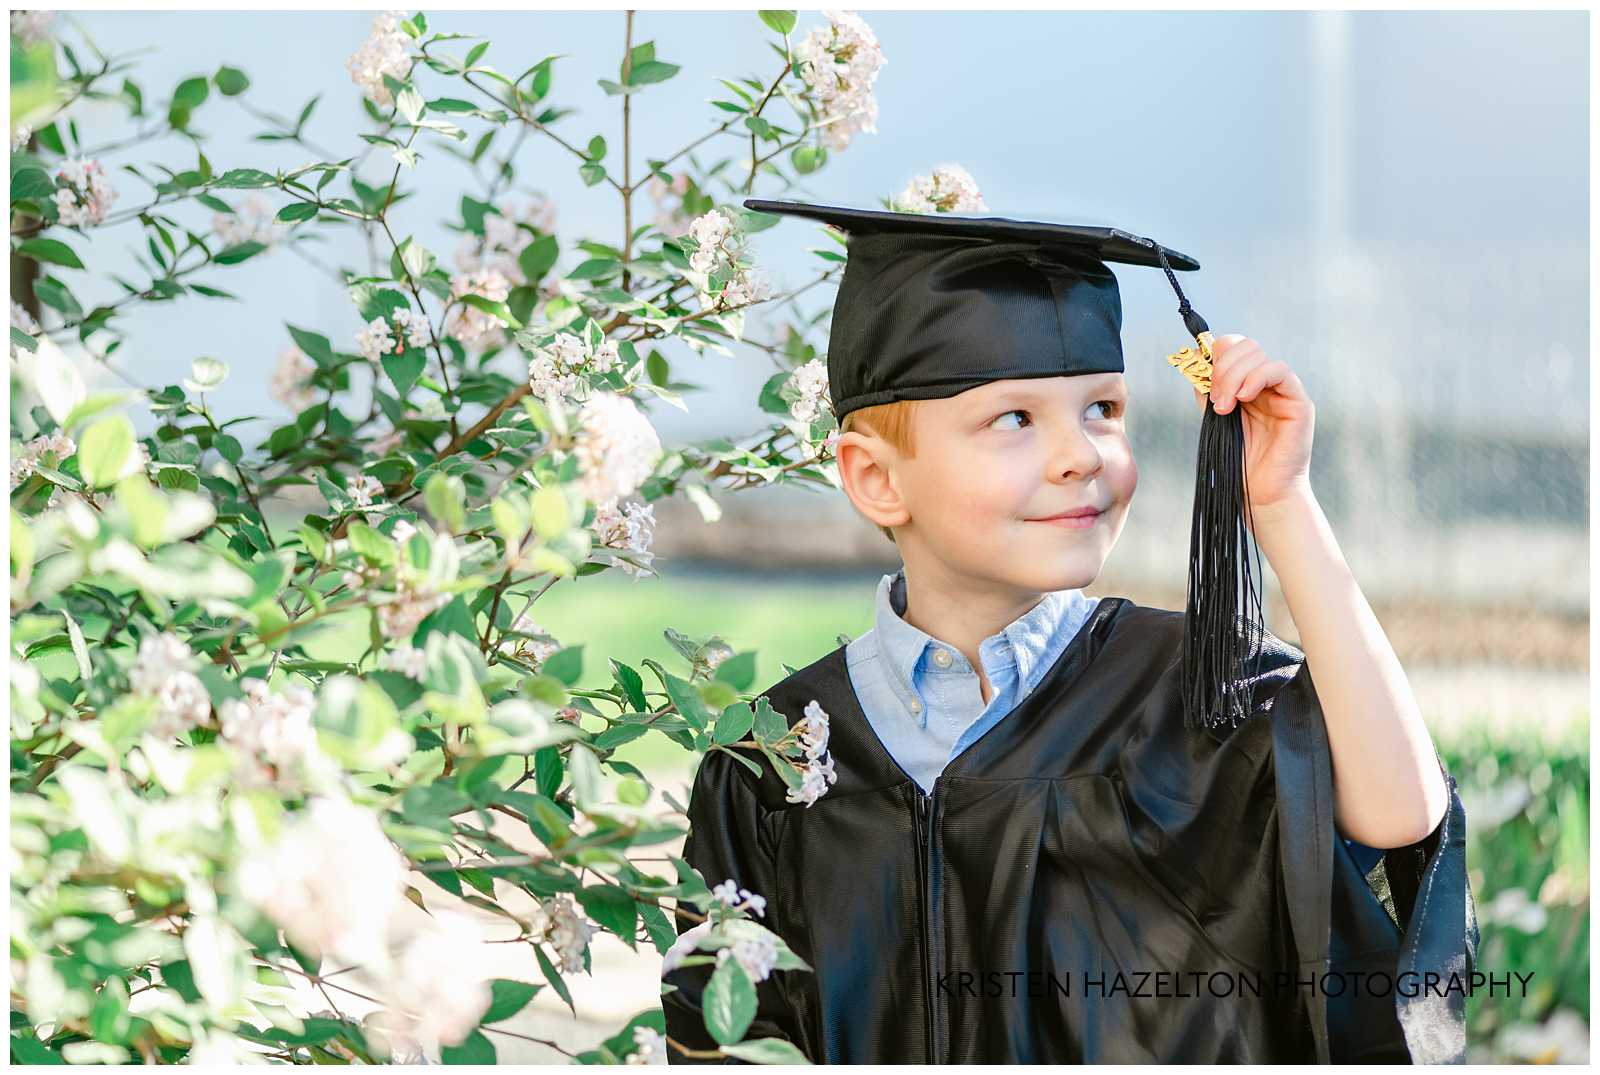 Kindergarten graduate wearing cap and gown and looking at his tassel.